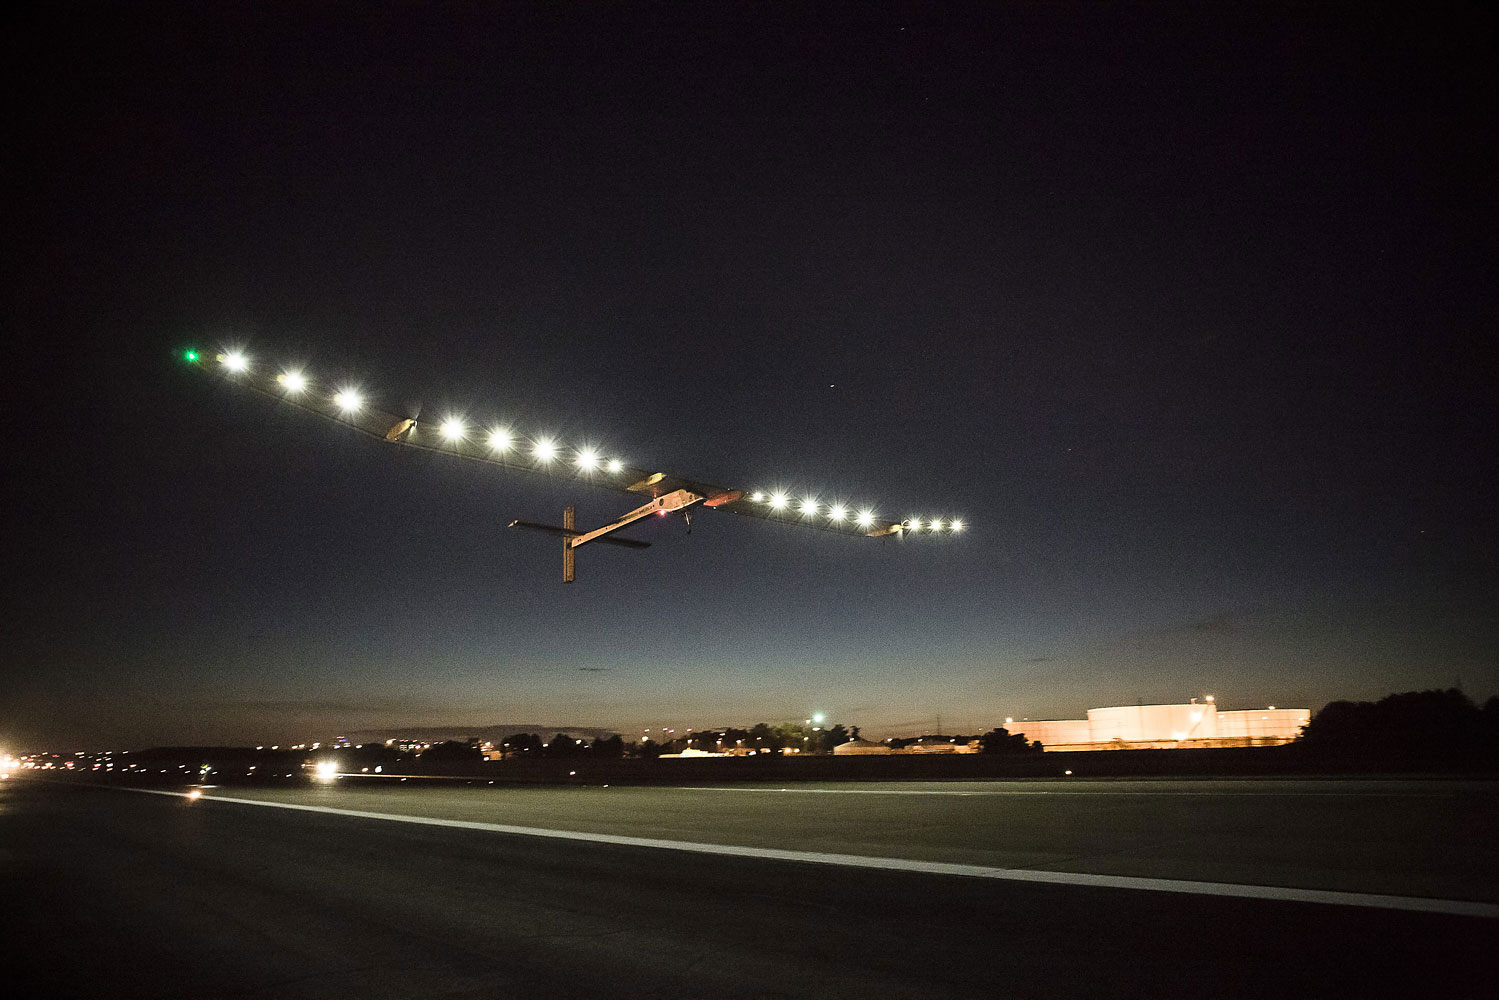 Solar Impulse takes off on its final leg of its flight across the USA from Dulles International Airport in Dulles, Va., July 6, 2013.